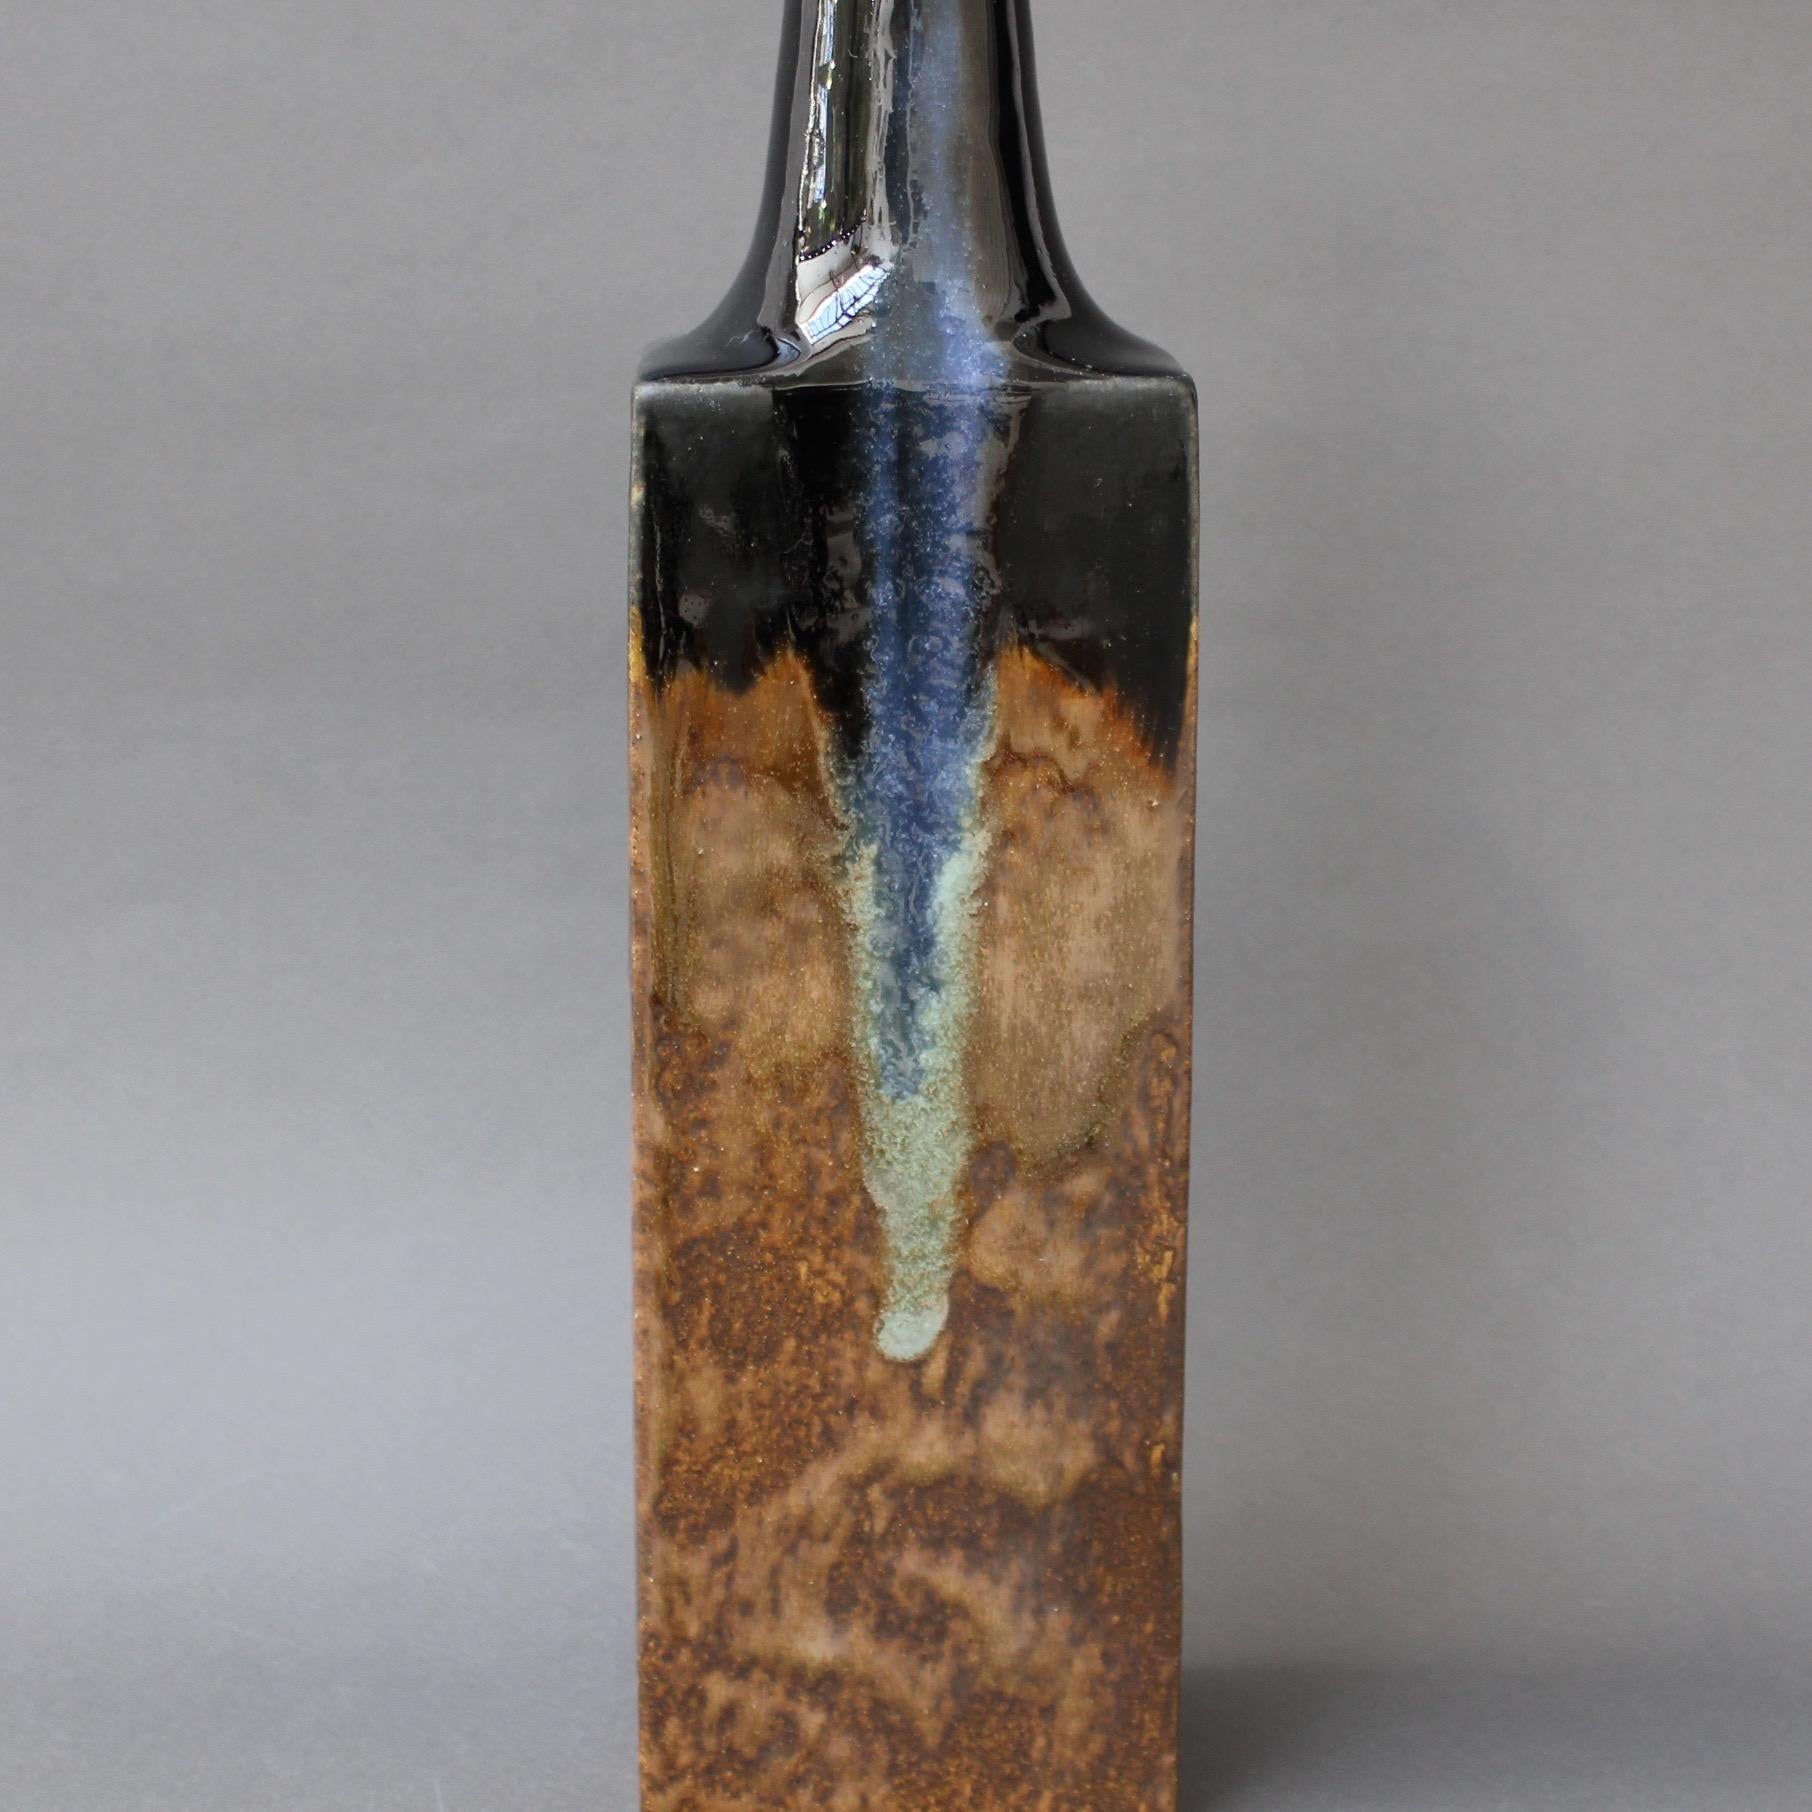 Black and Chocolate Brown Ceramic Bottle-Shaped Vase by Bruno Gambone, c. 1980s For Sale 1